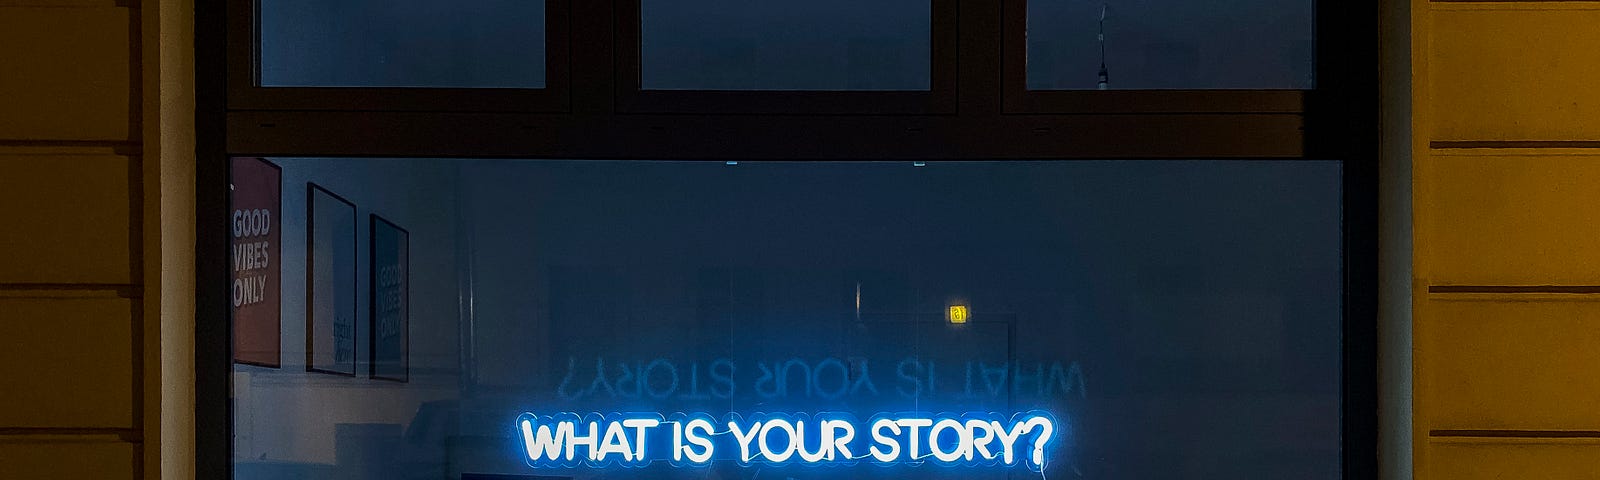 What is your story? Thought provoking message to get back to writing.